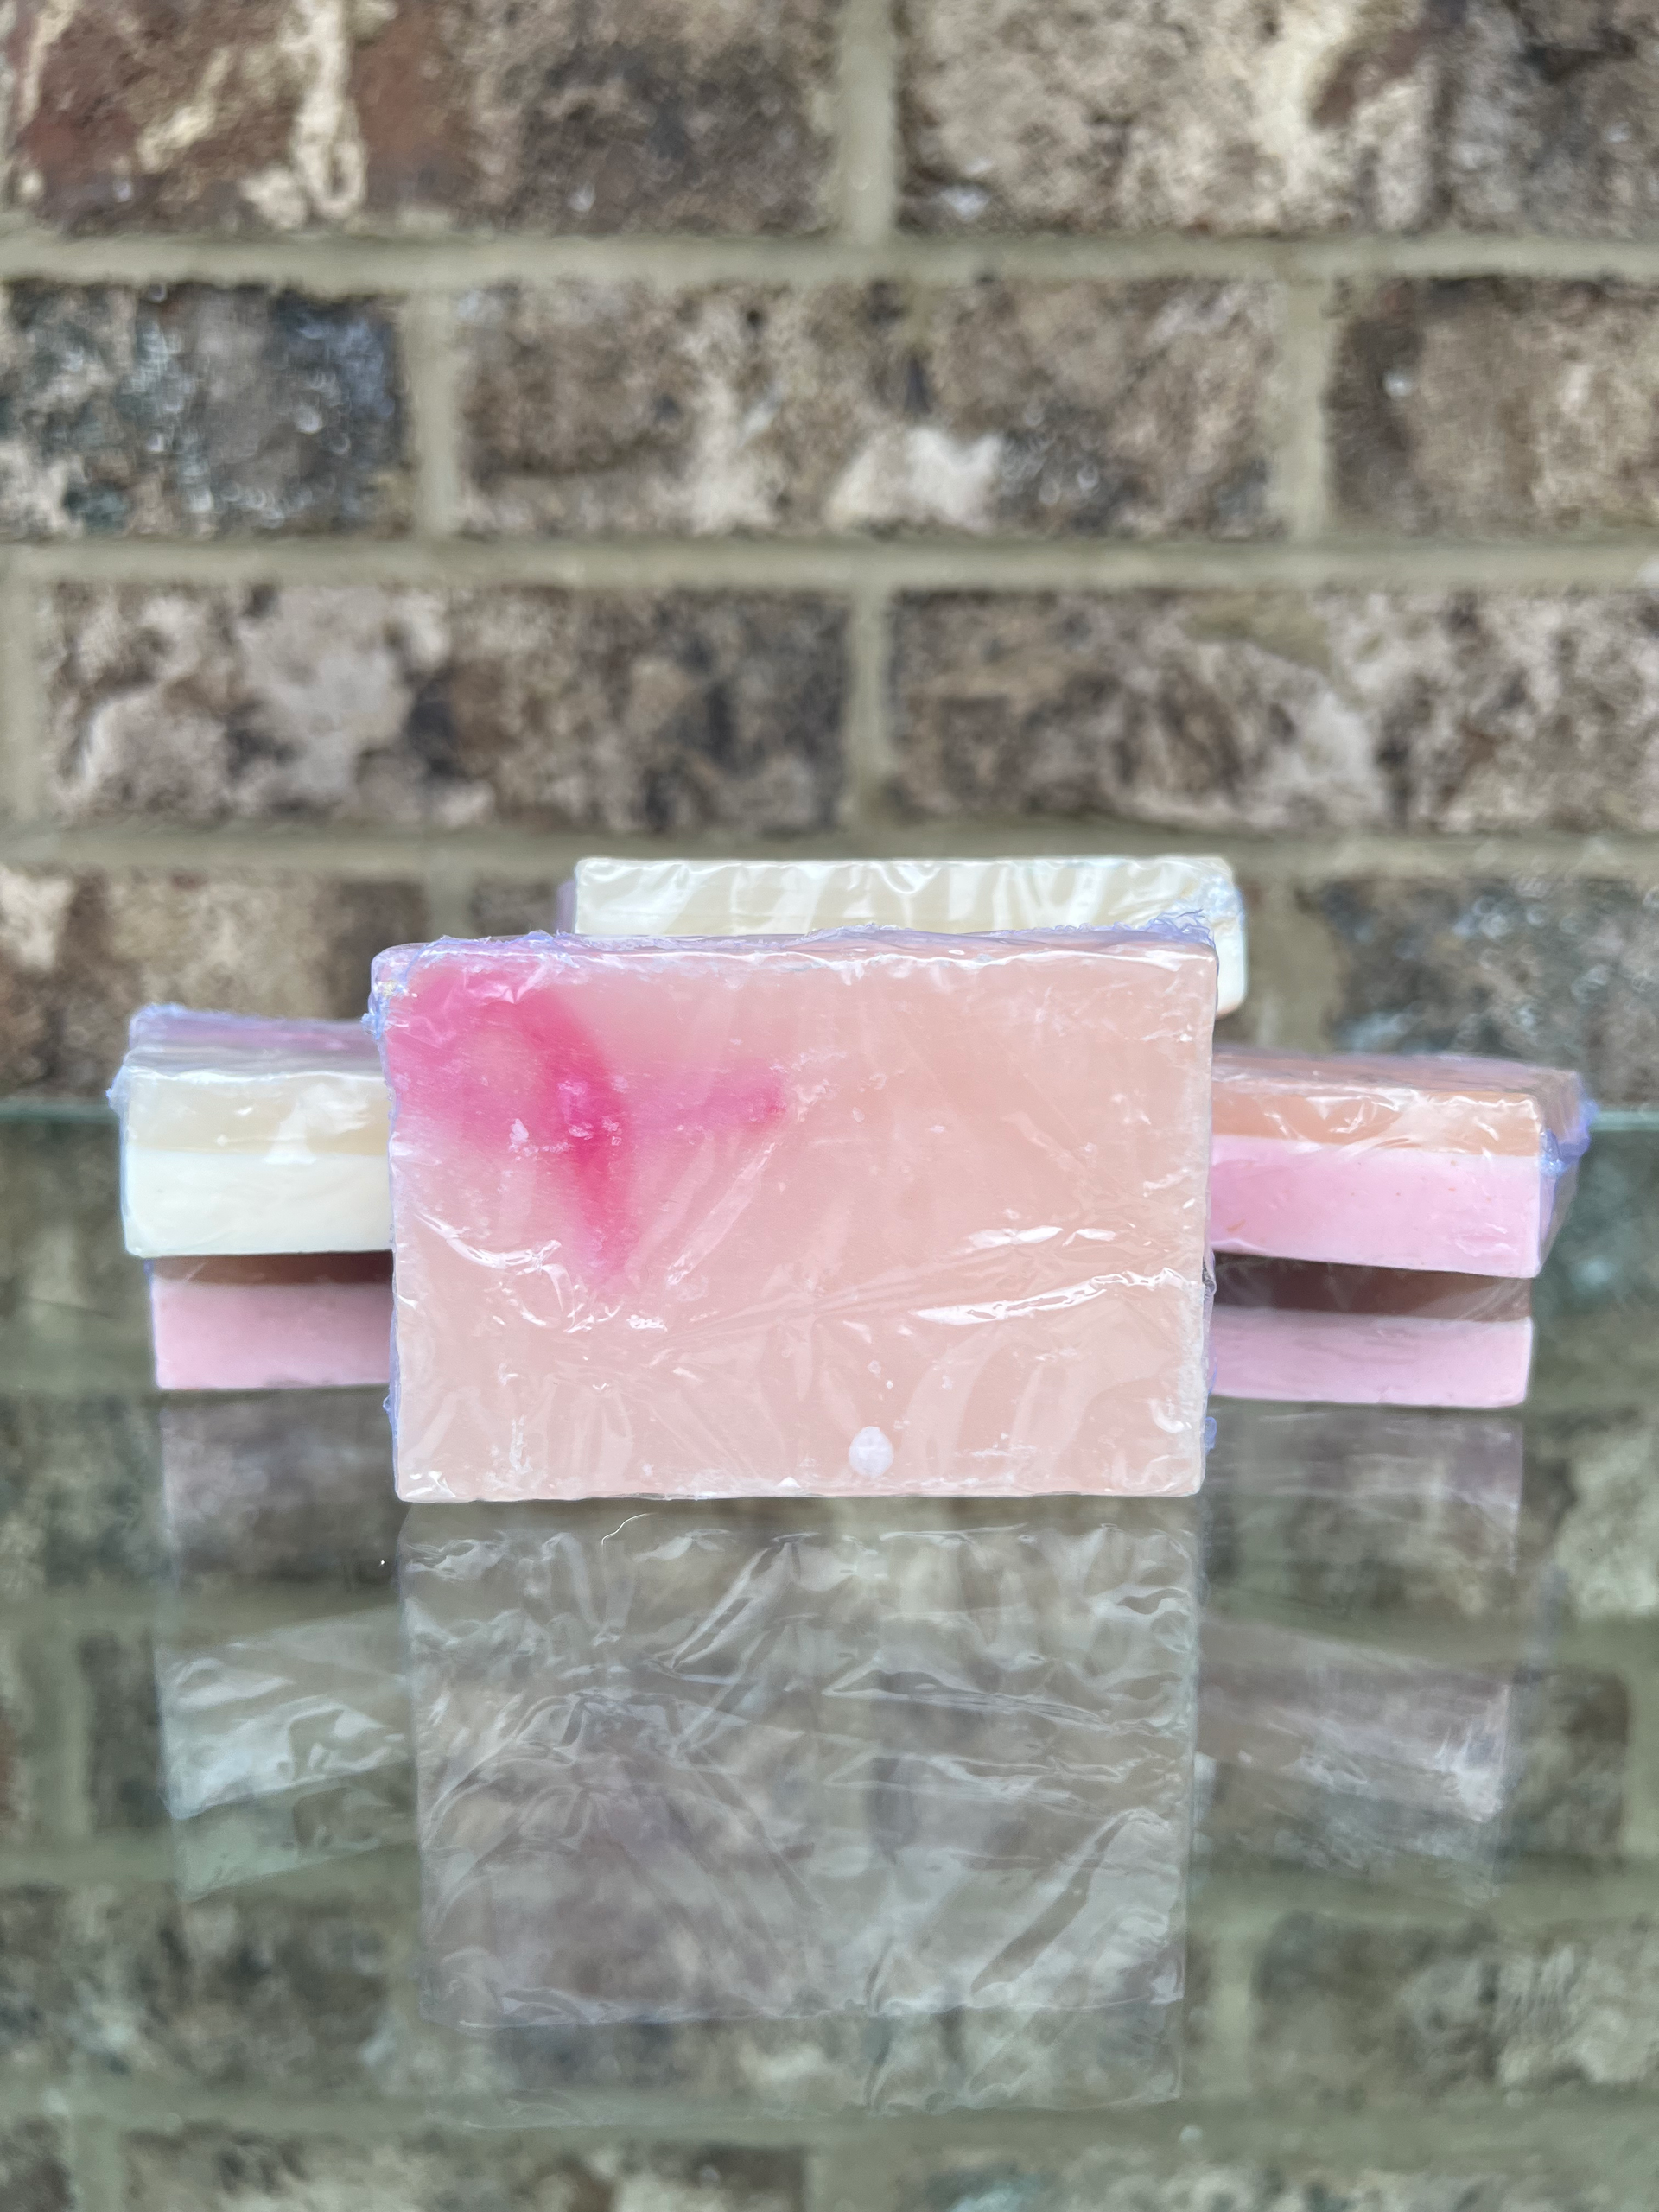 Breast Cancer Awareness Soaps "Serenity"